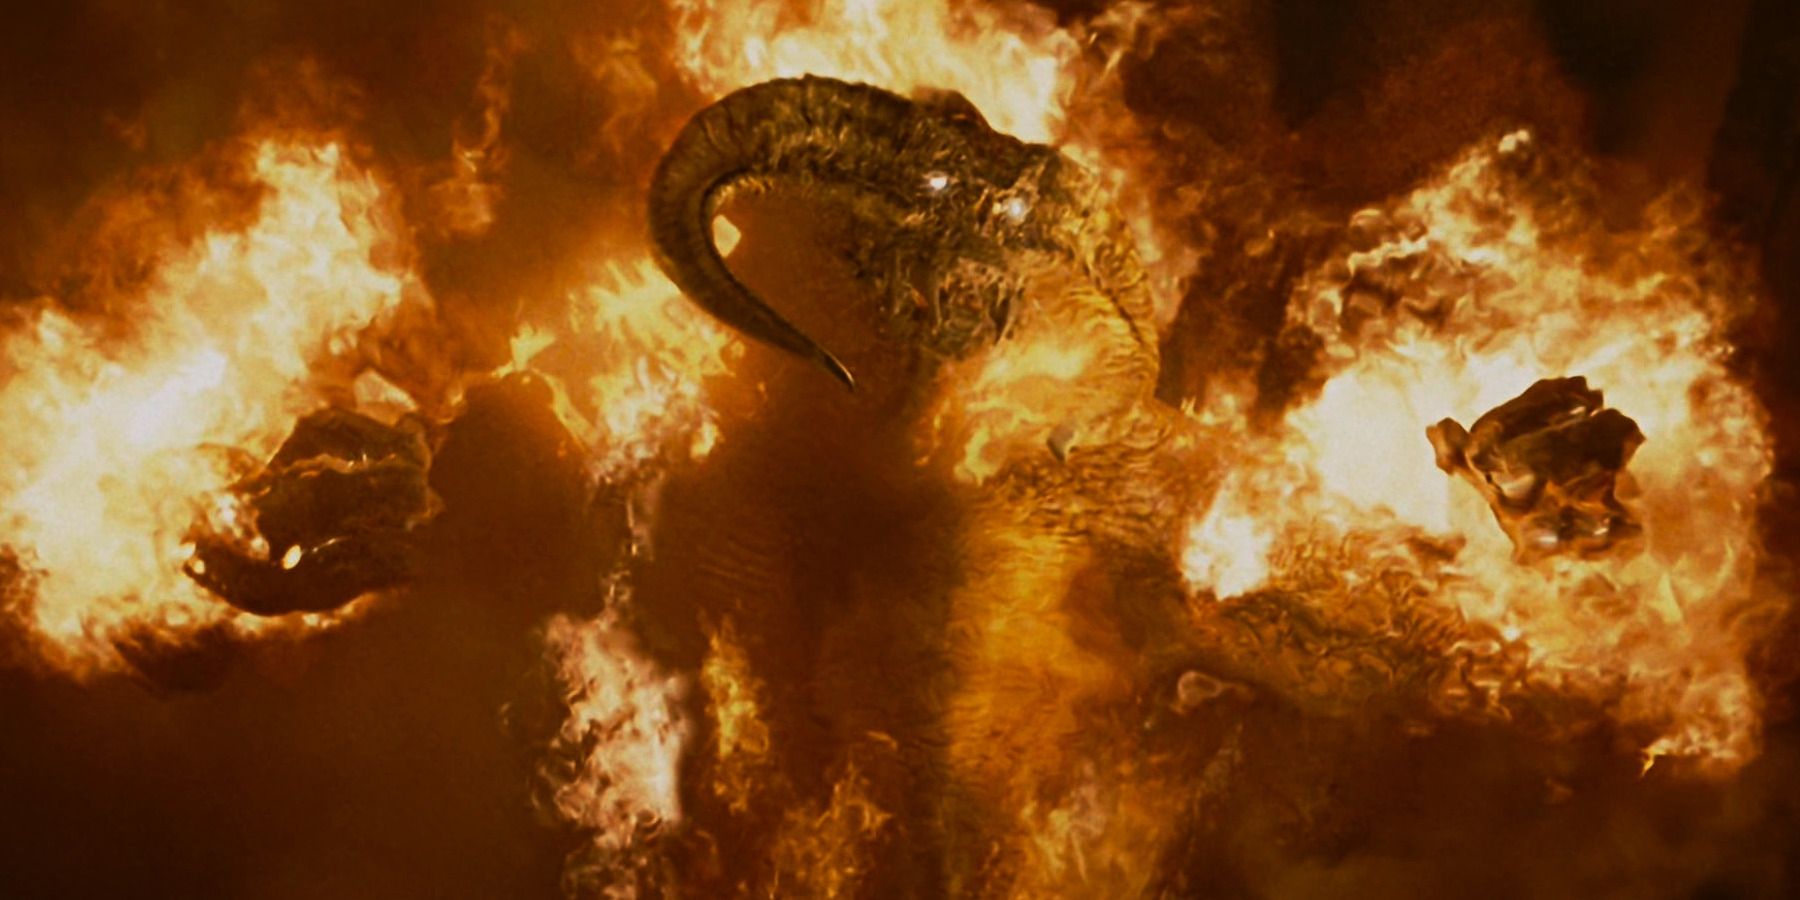 A flaming Balrog in The Lord Of The Rings